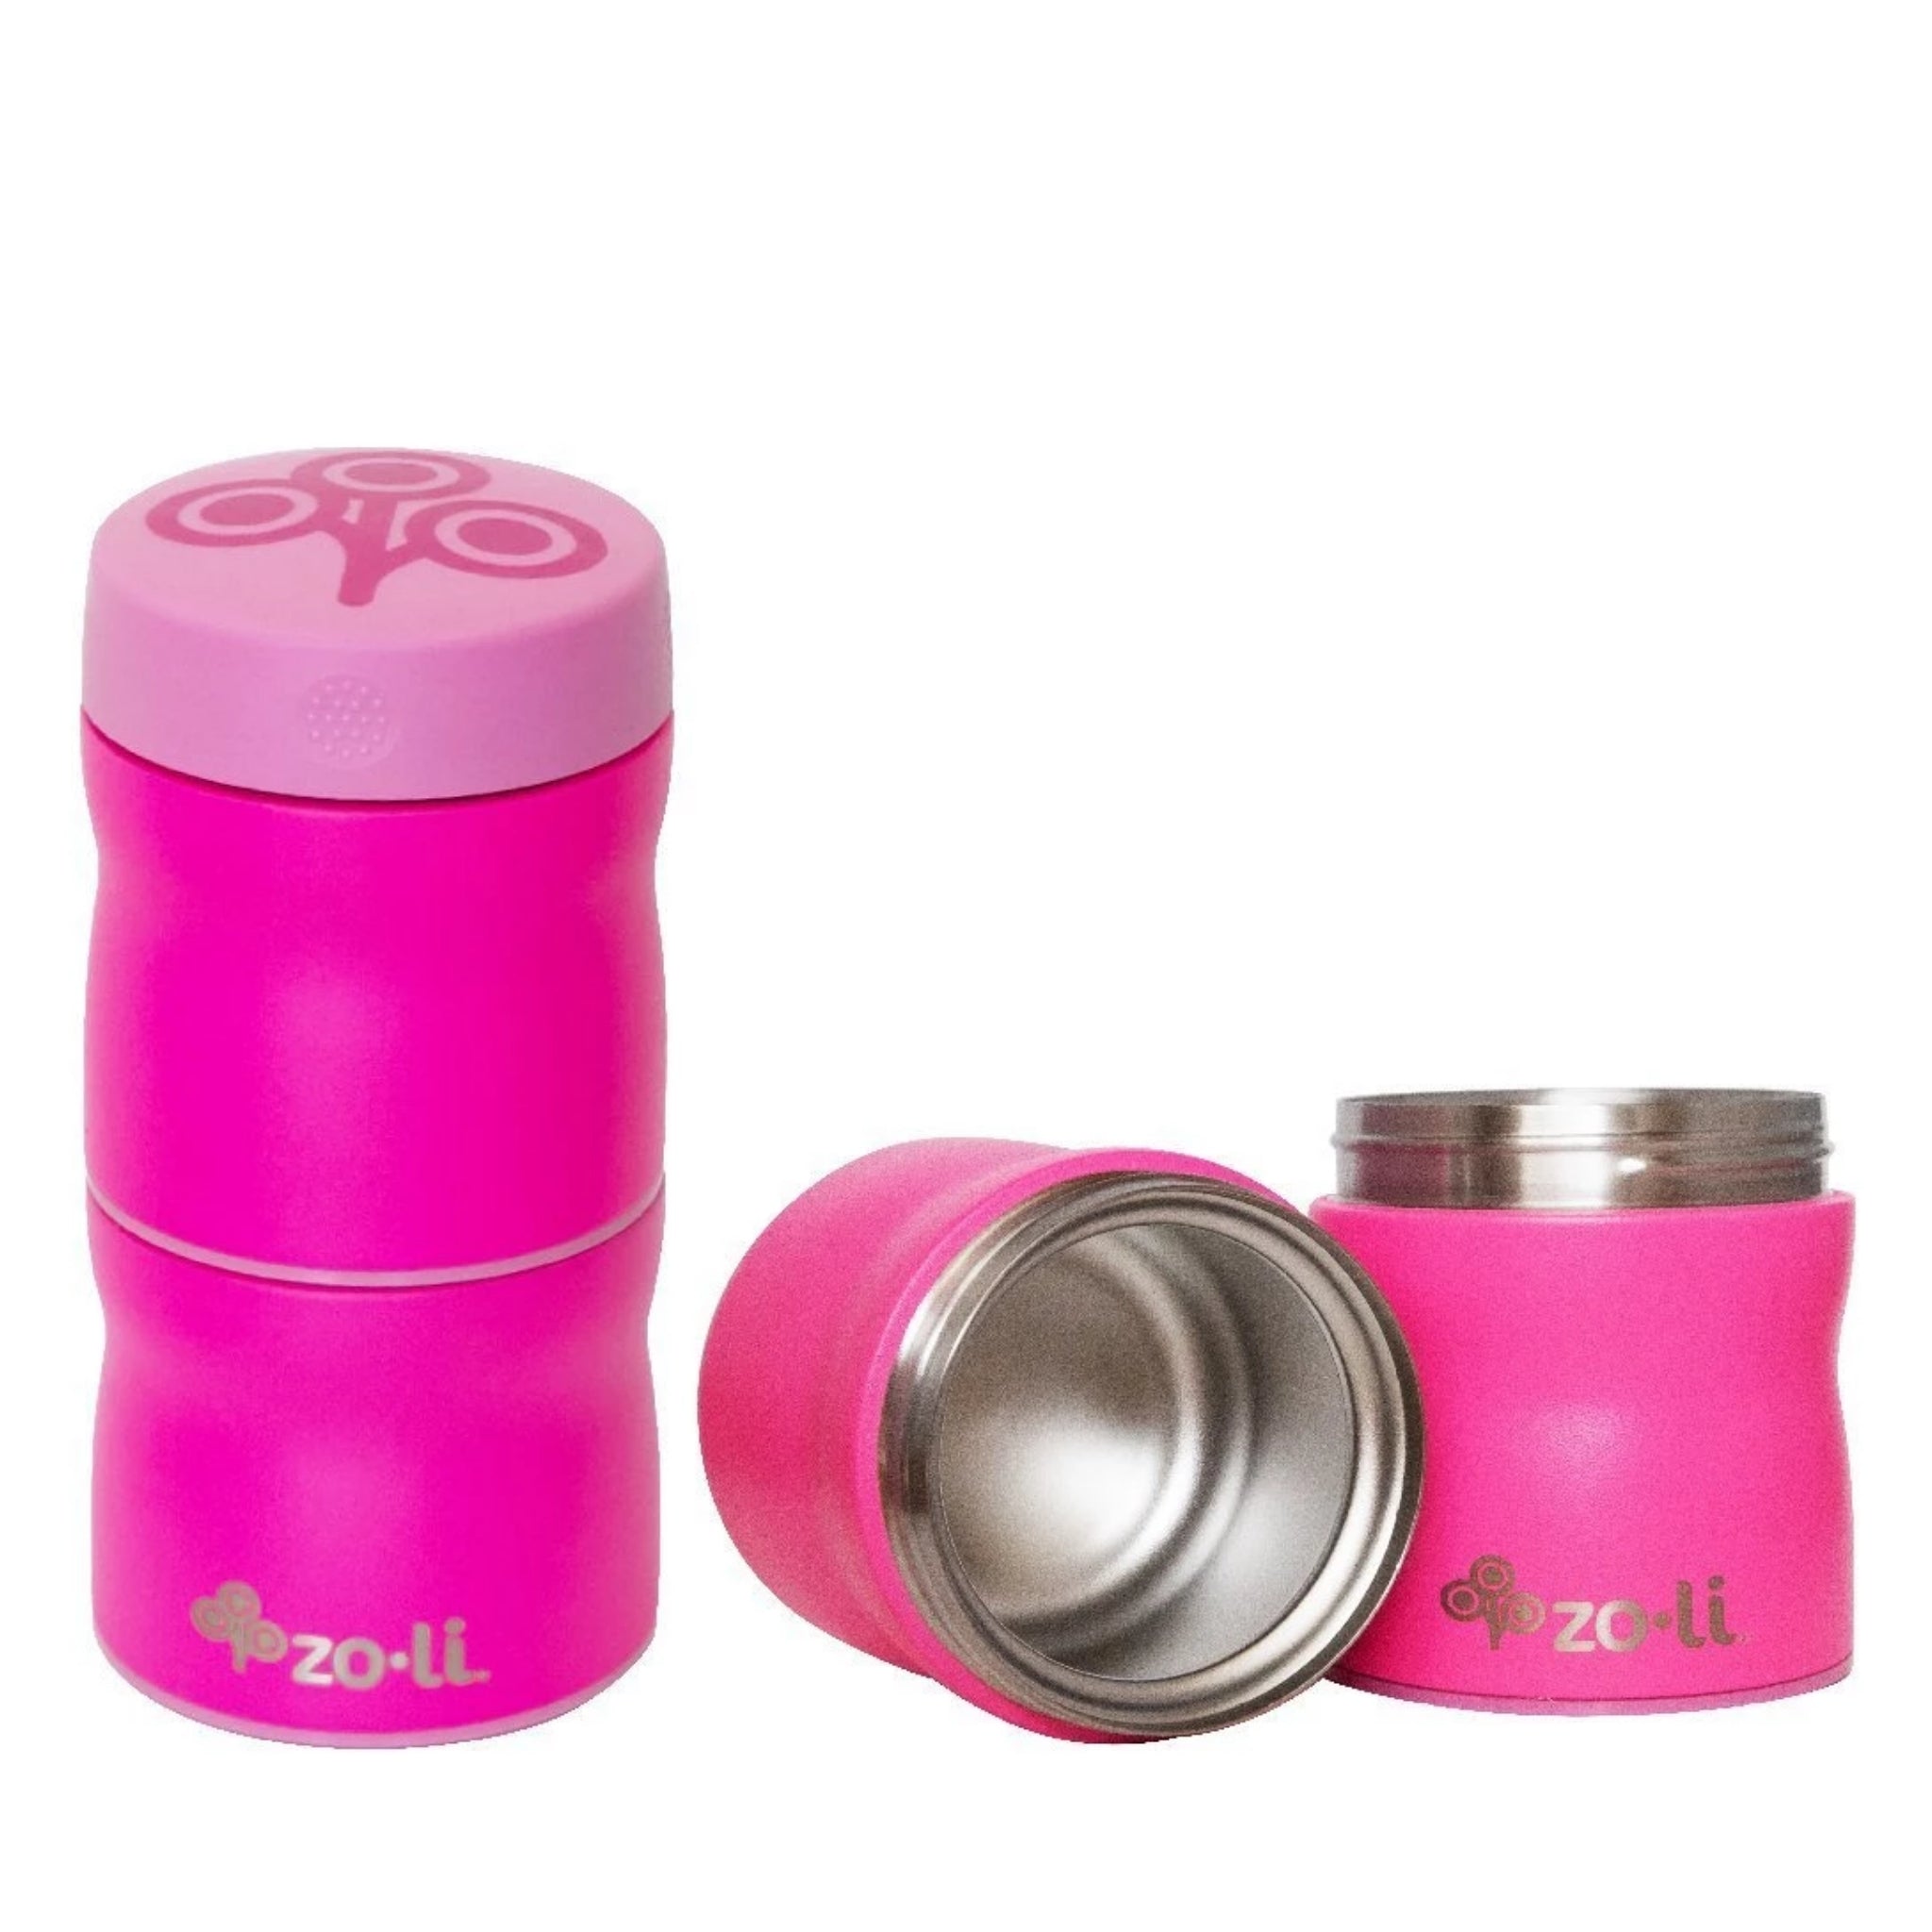 Zoli Pow This & That Stainless Steel Insulated Food Jar- Pink